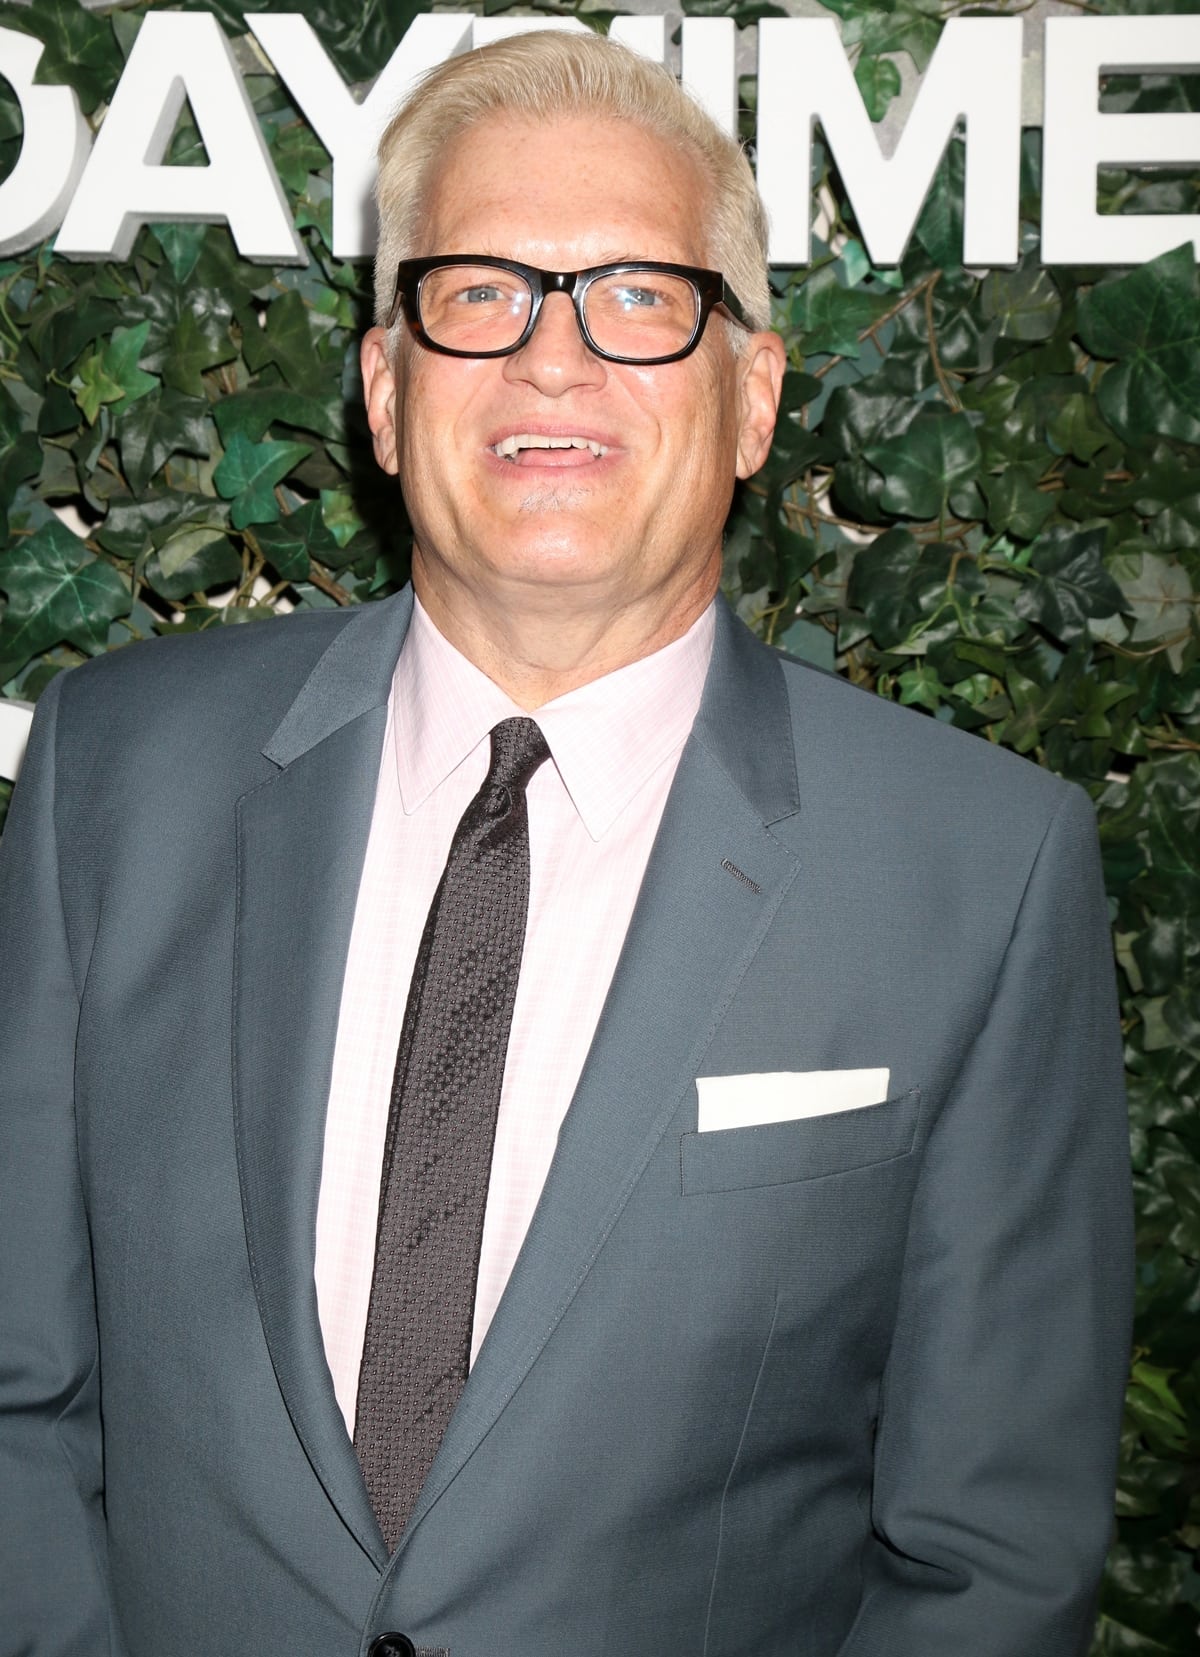 After serving in the U.S. Marine Corps and making a name for himself in stand-up comedy, Drew Carey gained stardom in his sitcom, The Drew Carey Show, and as host of the improv comedy show Whose Line Is It Anyway? and the game show The Price Is Right